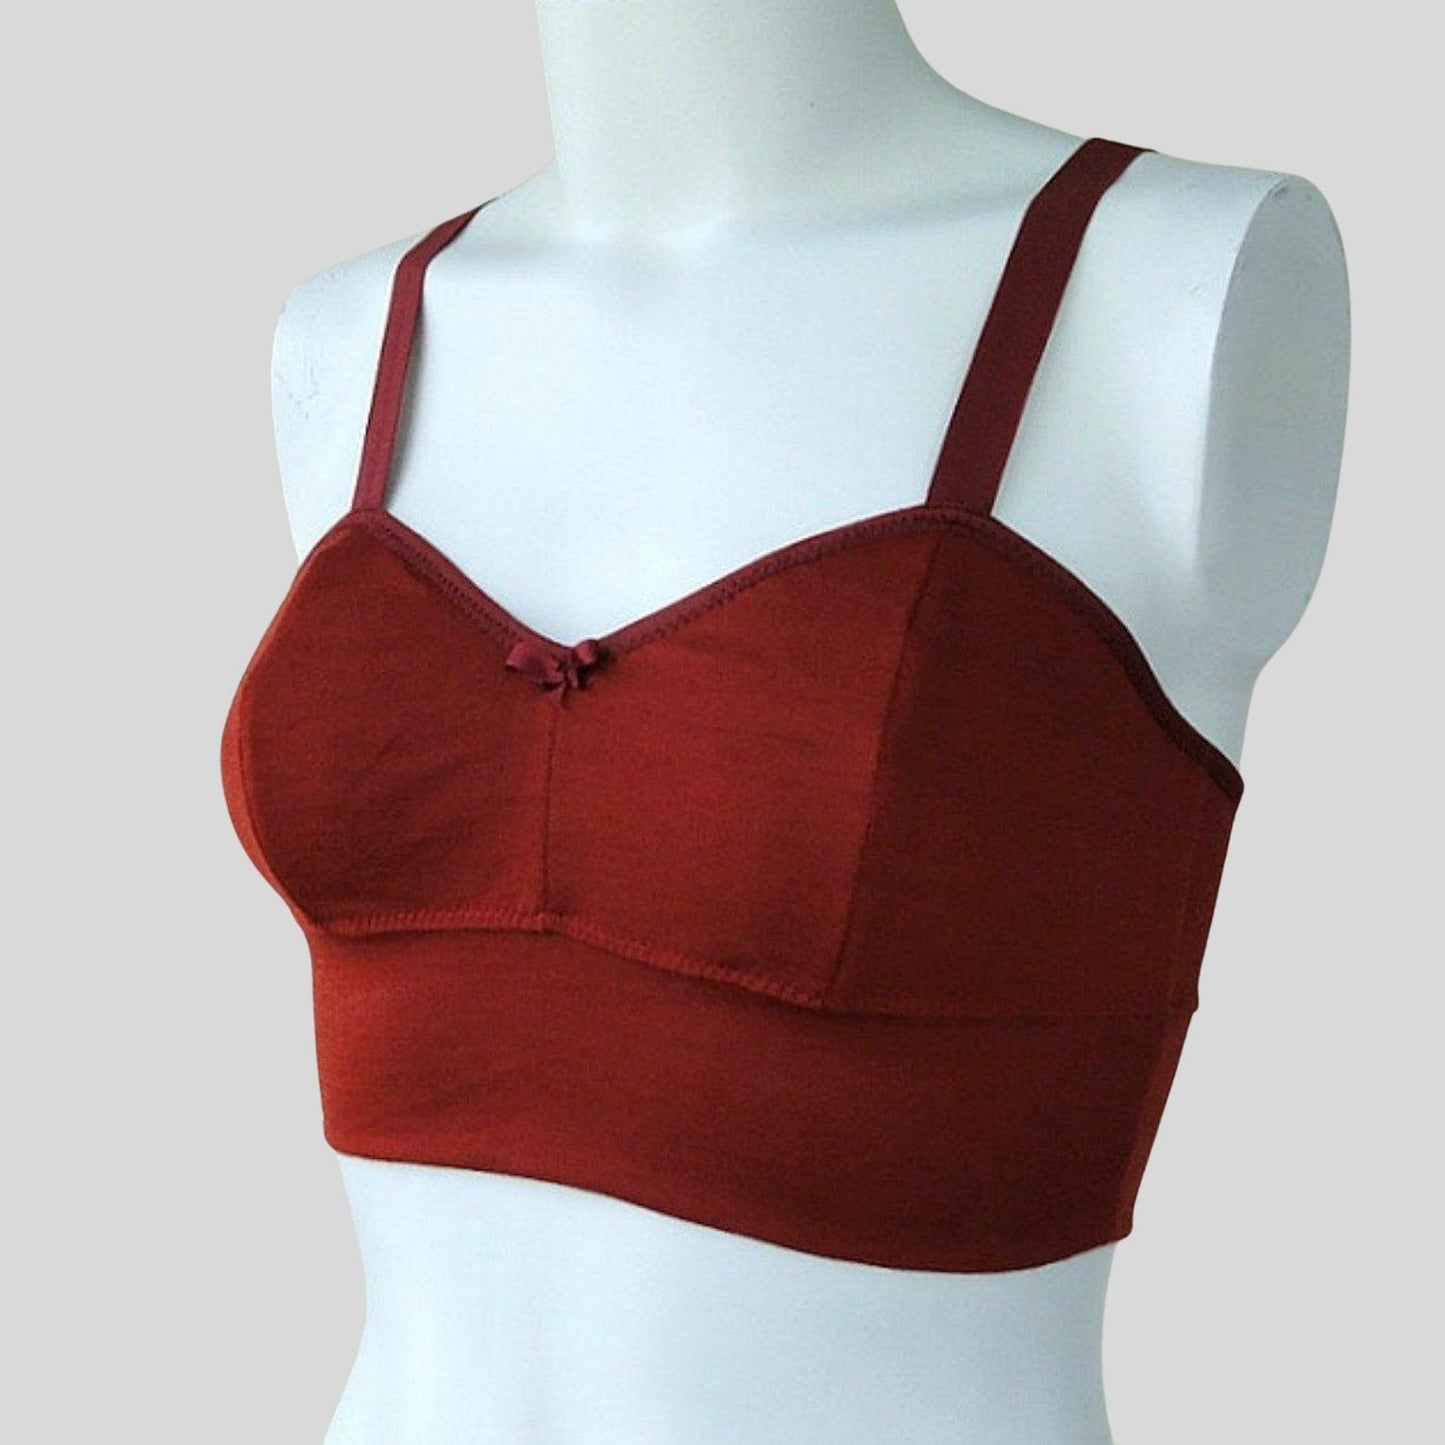 90% Polyamide & 10% Spandex Red Color Bralette Bra at Rs 210/piece